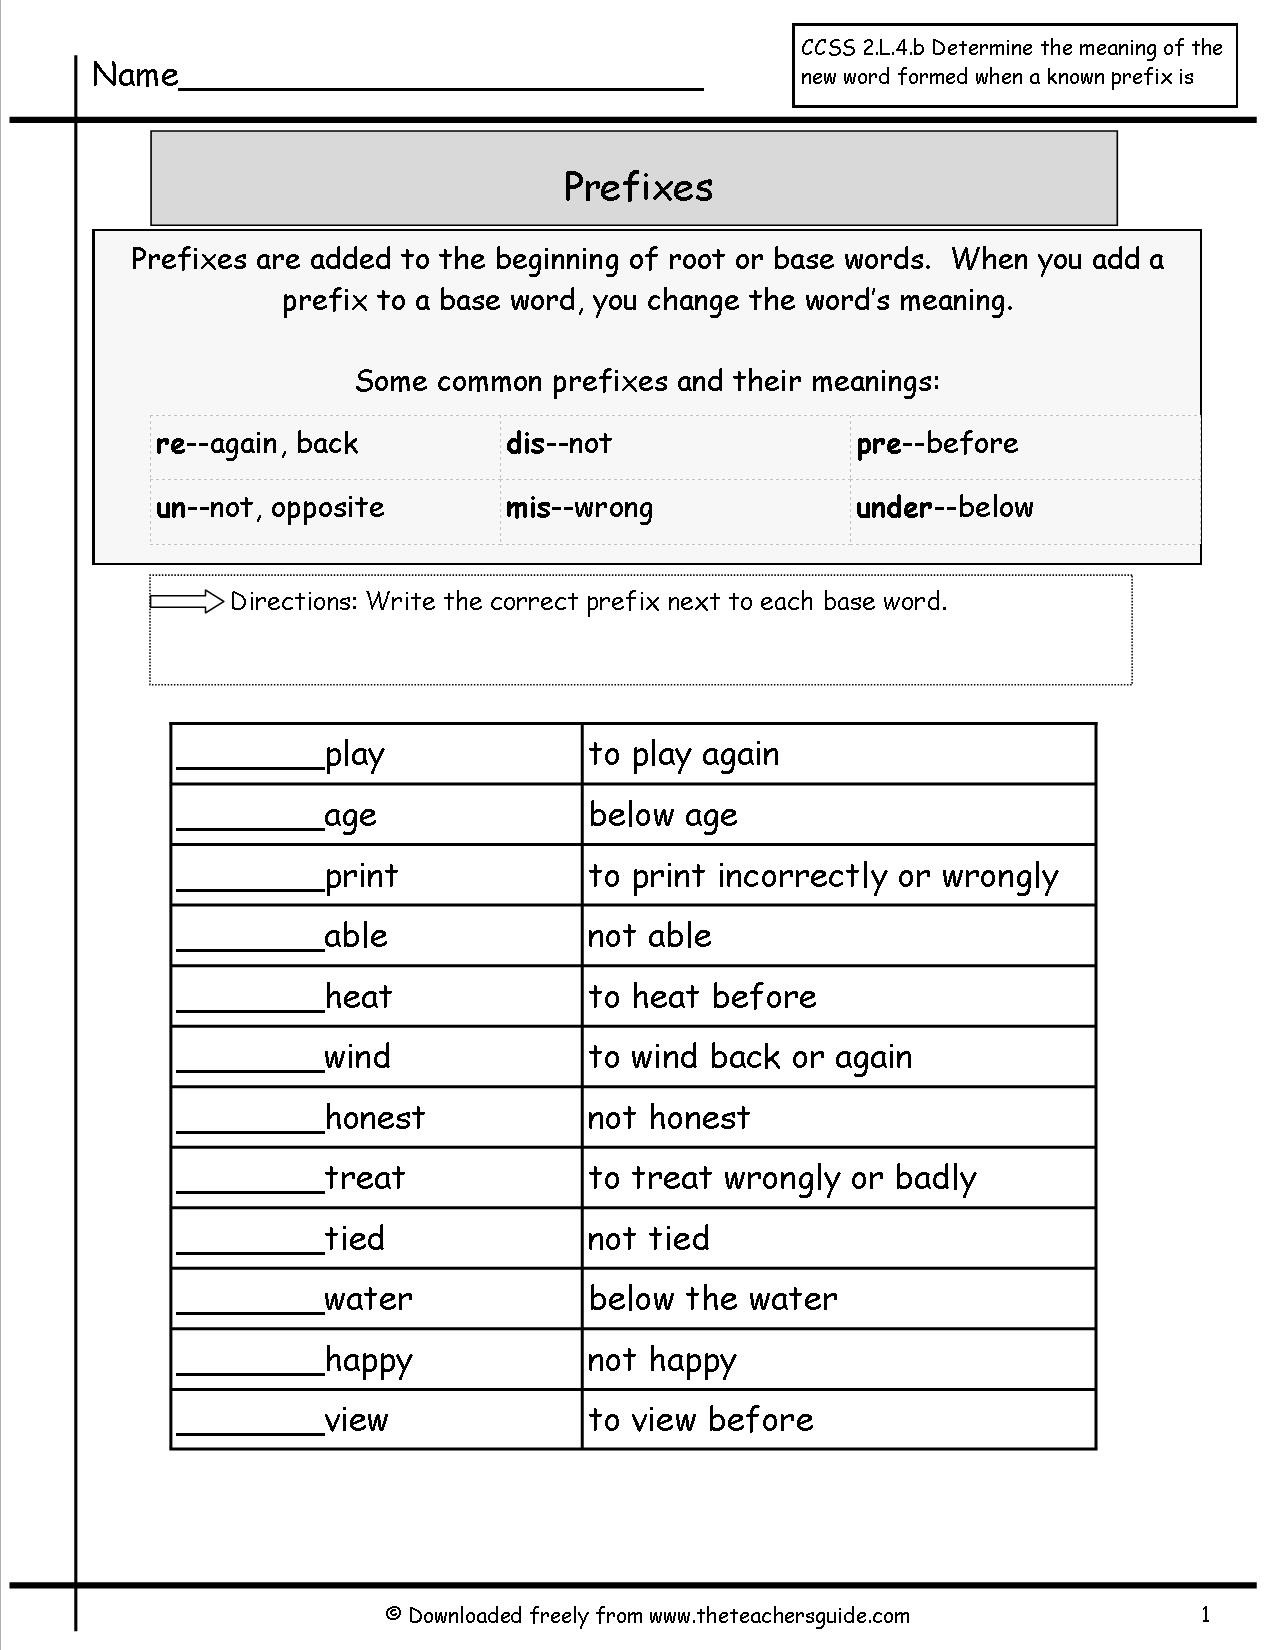 Suffixes Worksheets for 3rd Grade Free Prefixes and Suffixes Worksheets From the Teacher S Guide